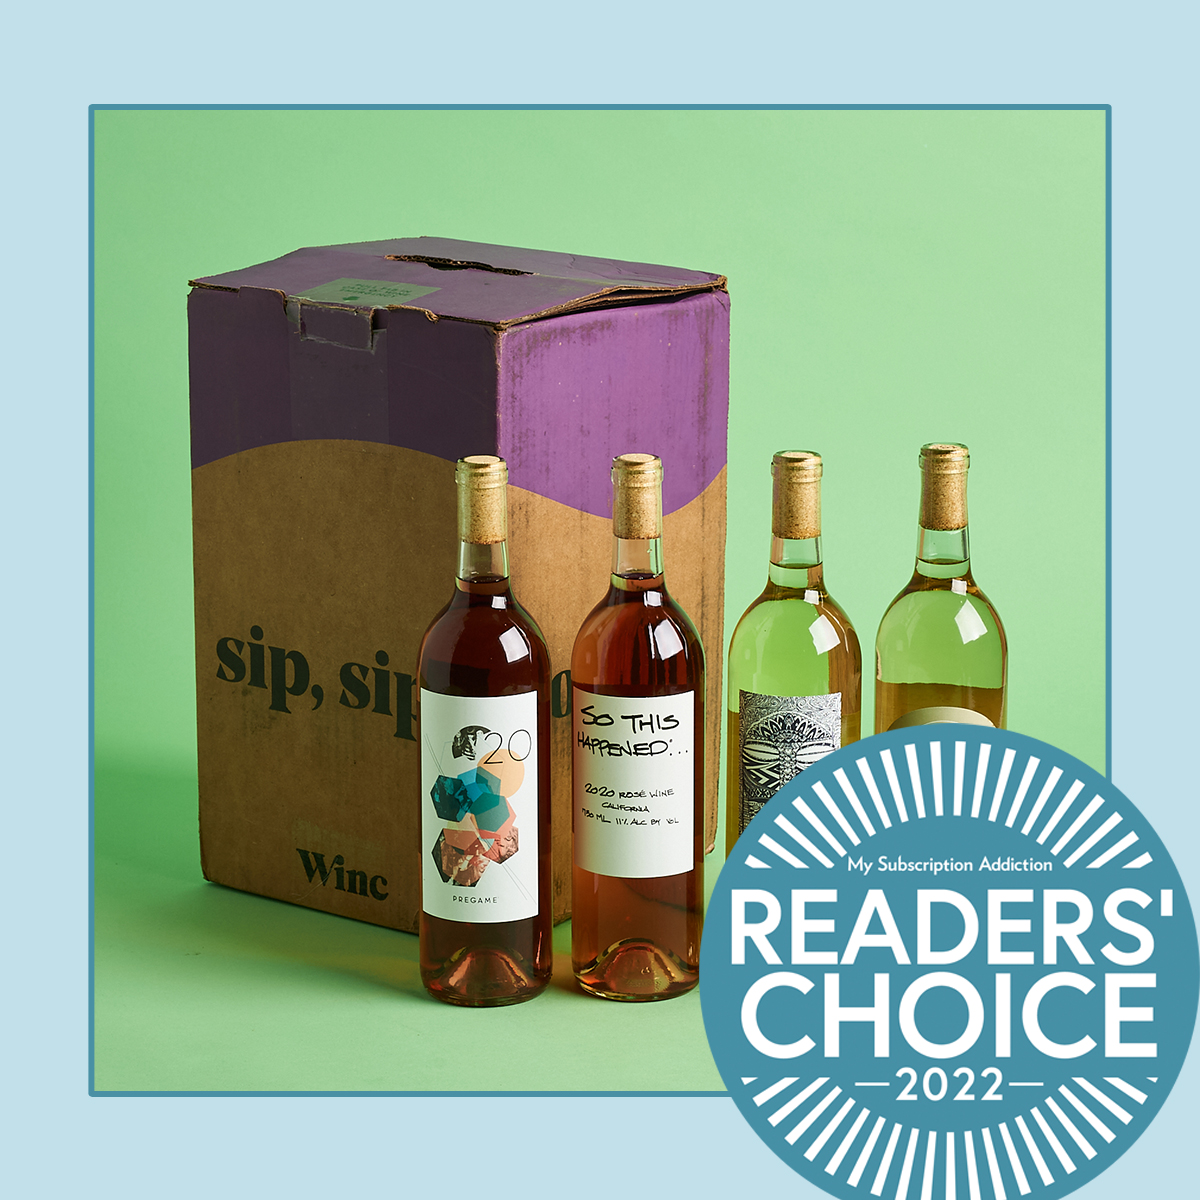 9 Best Alcohol Subscription Boxes – 2022 Readers’ Choice Awards